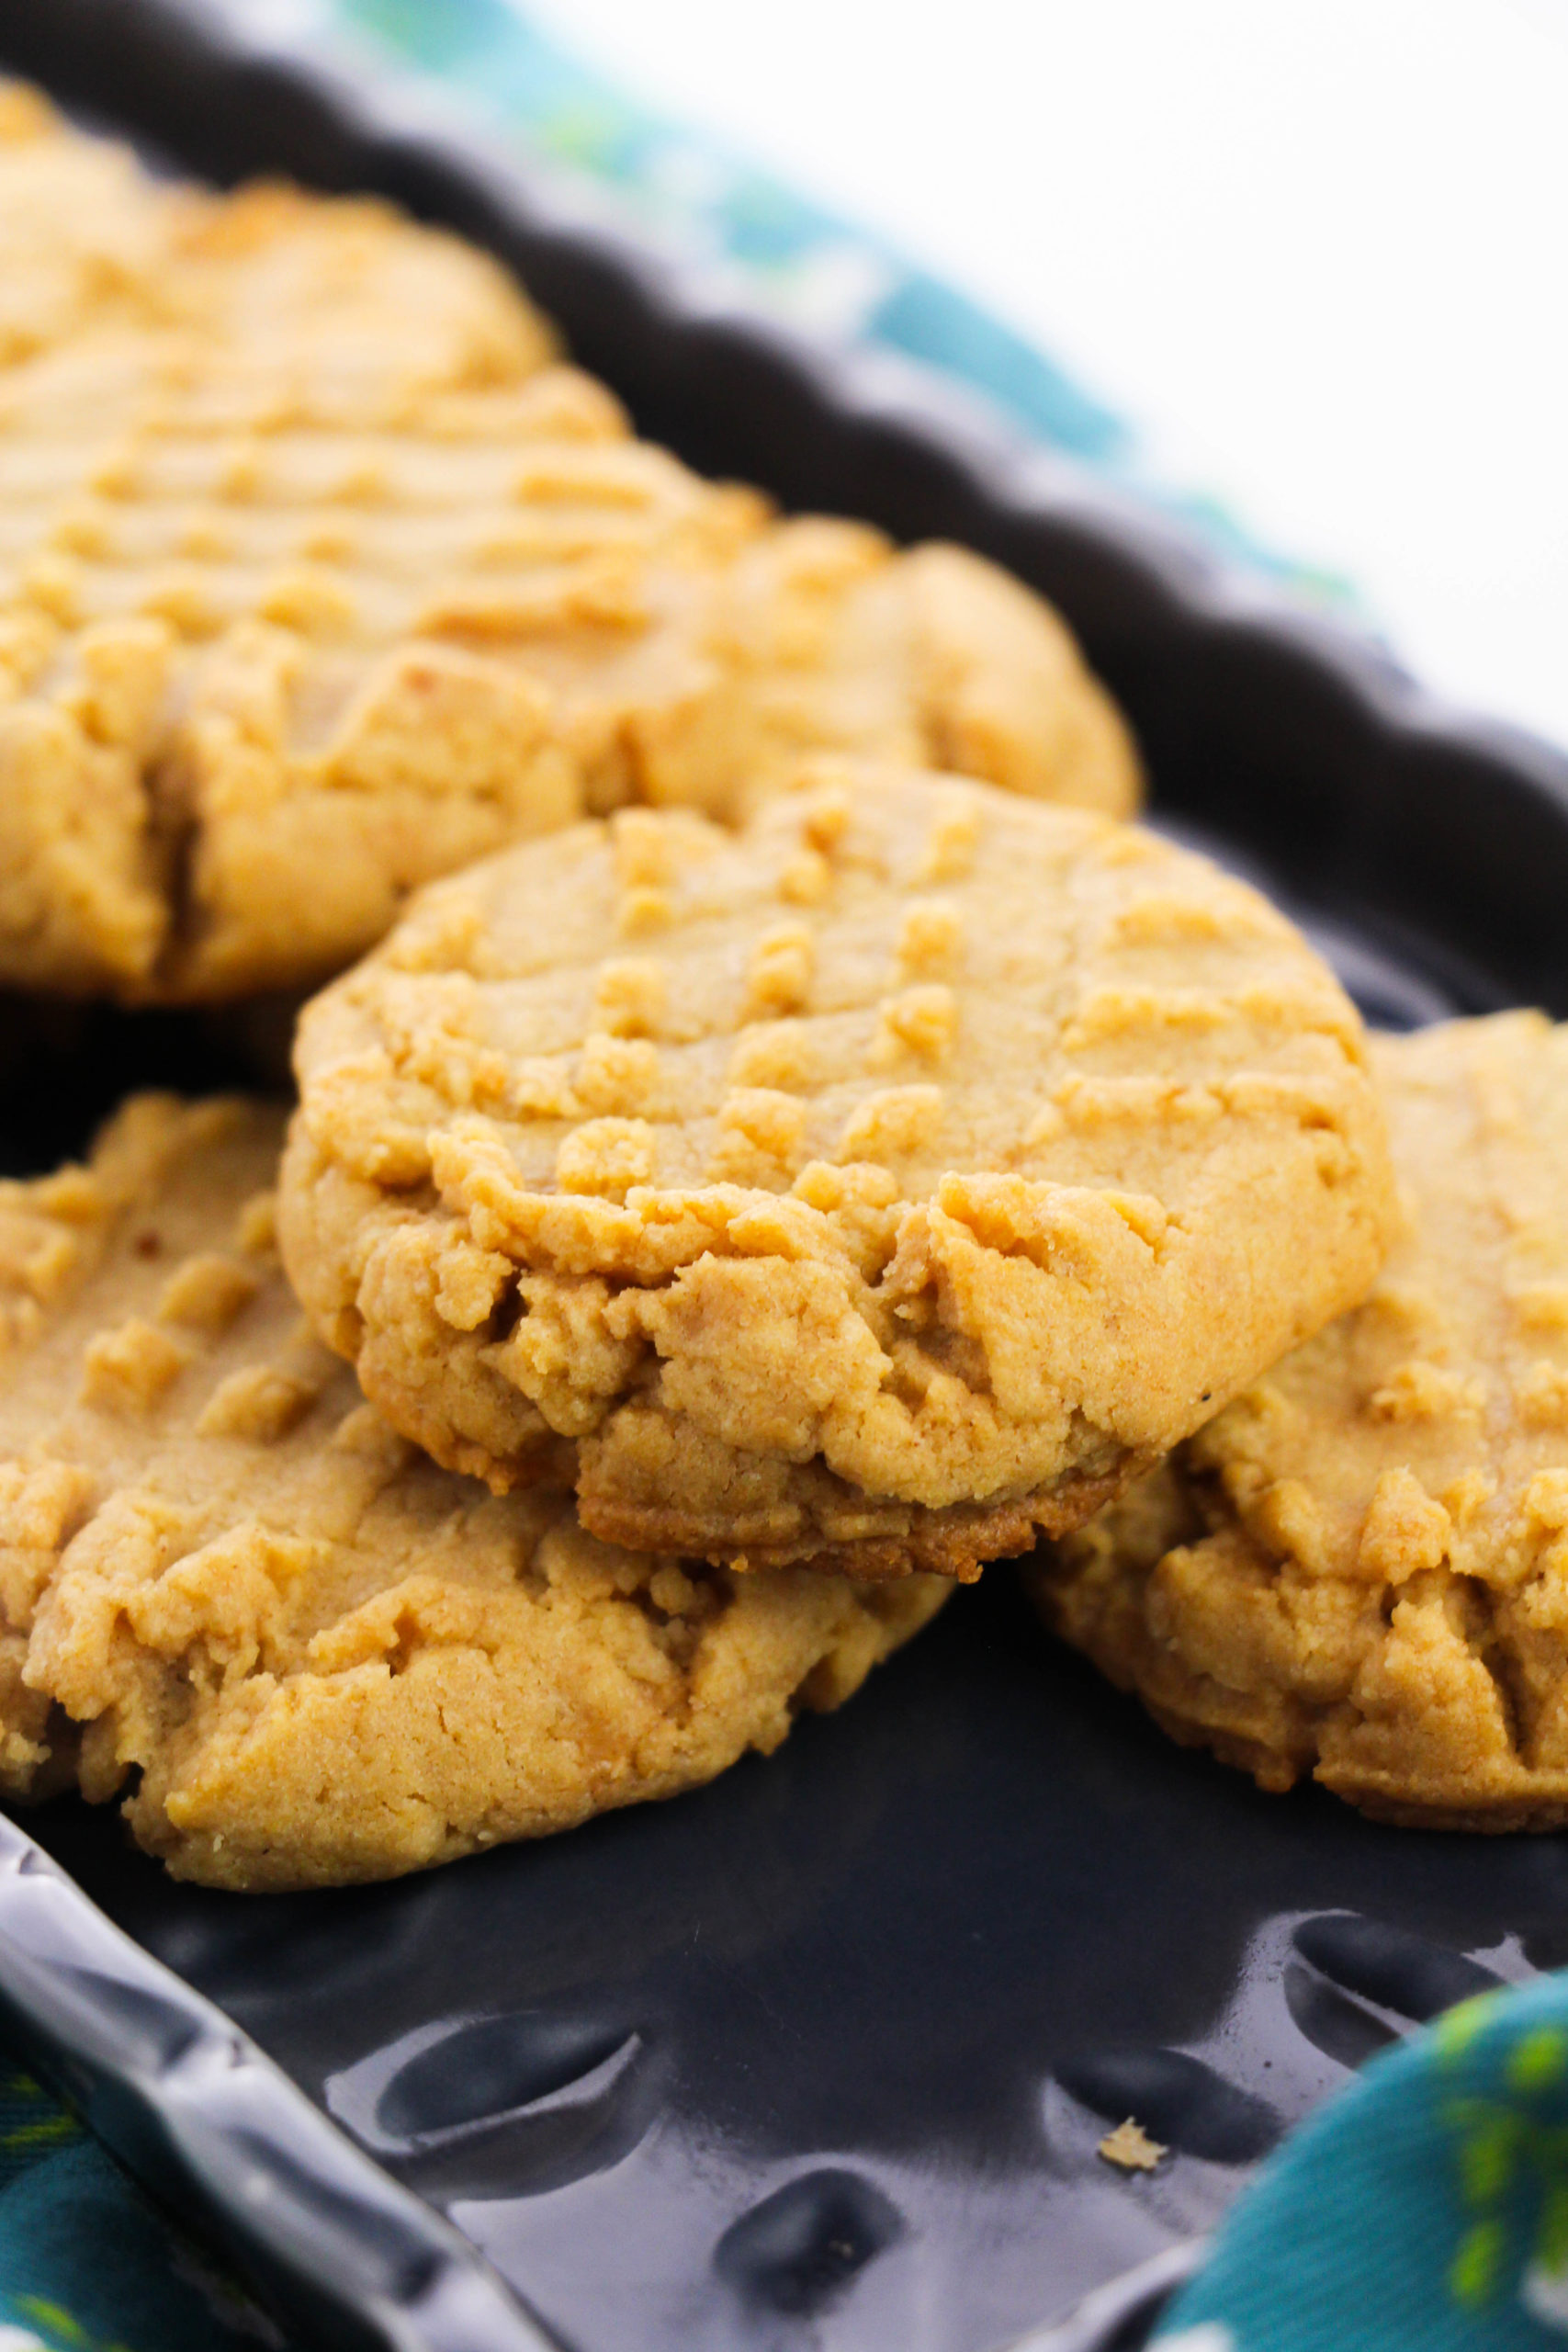 Jif Peanut Butter Cookies in close up.